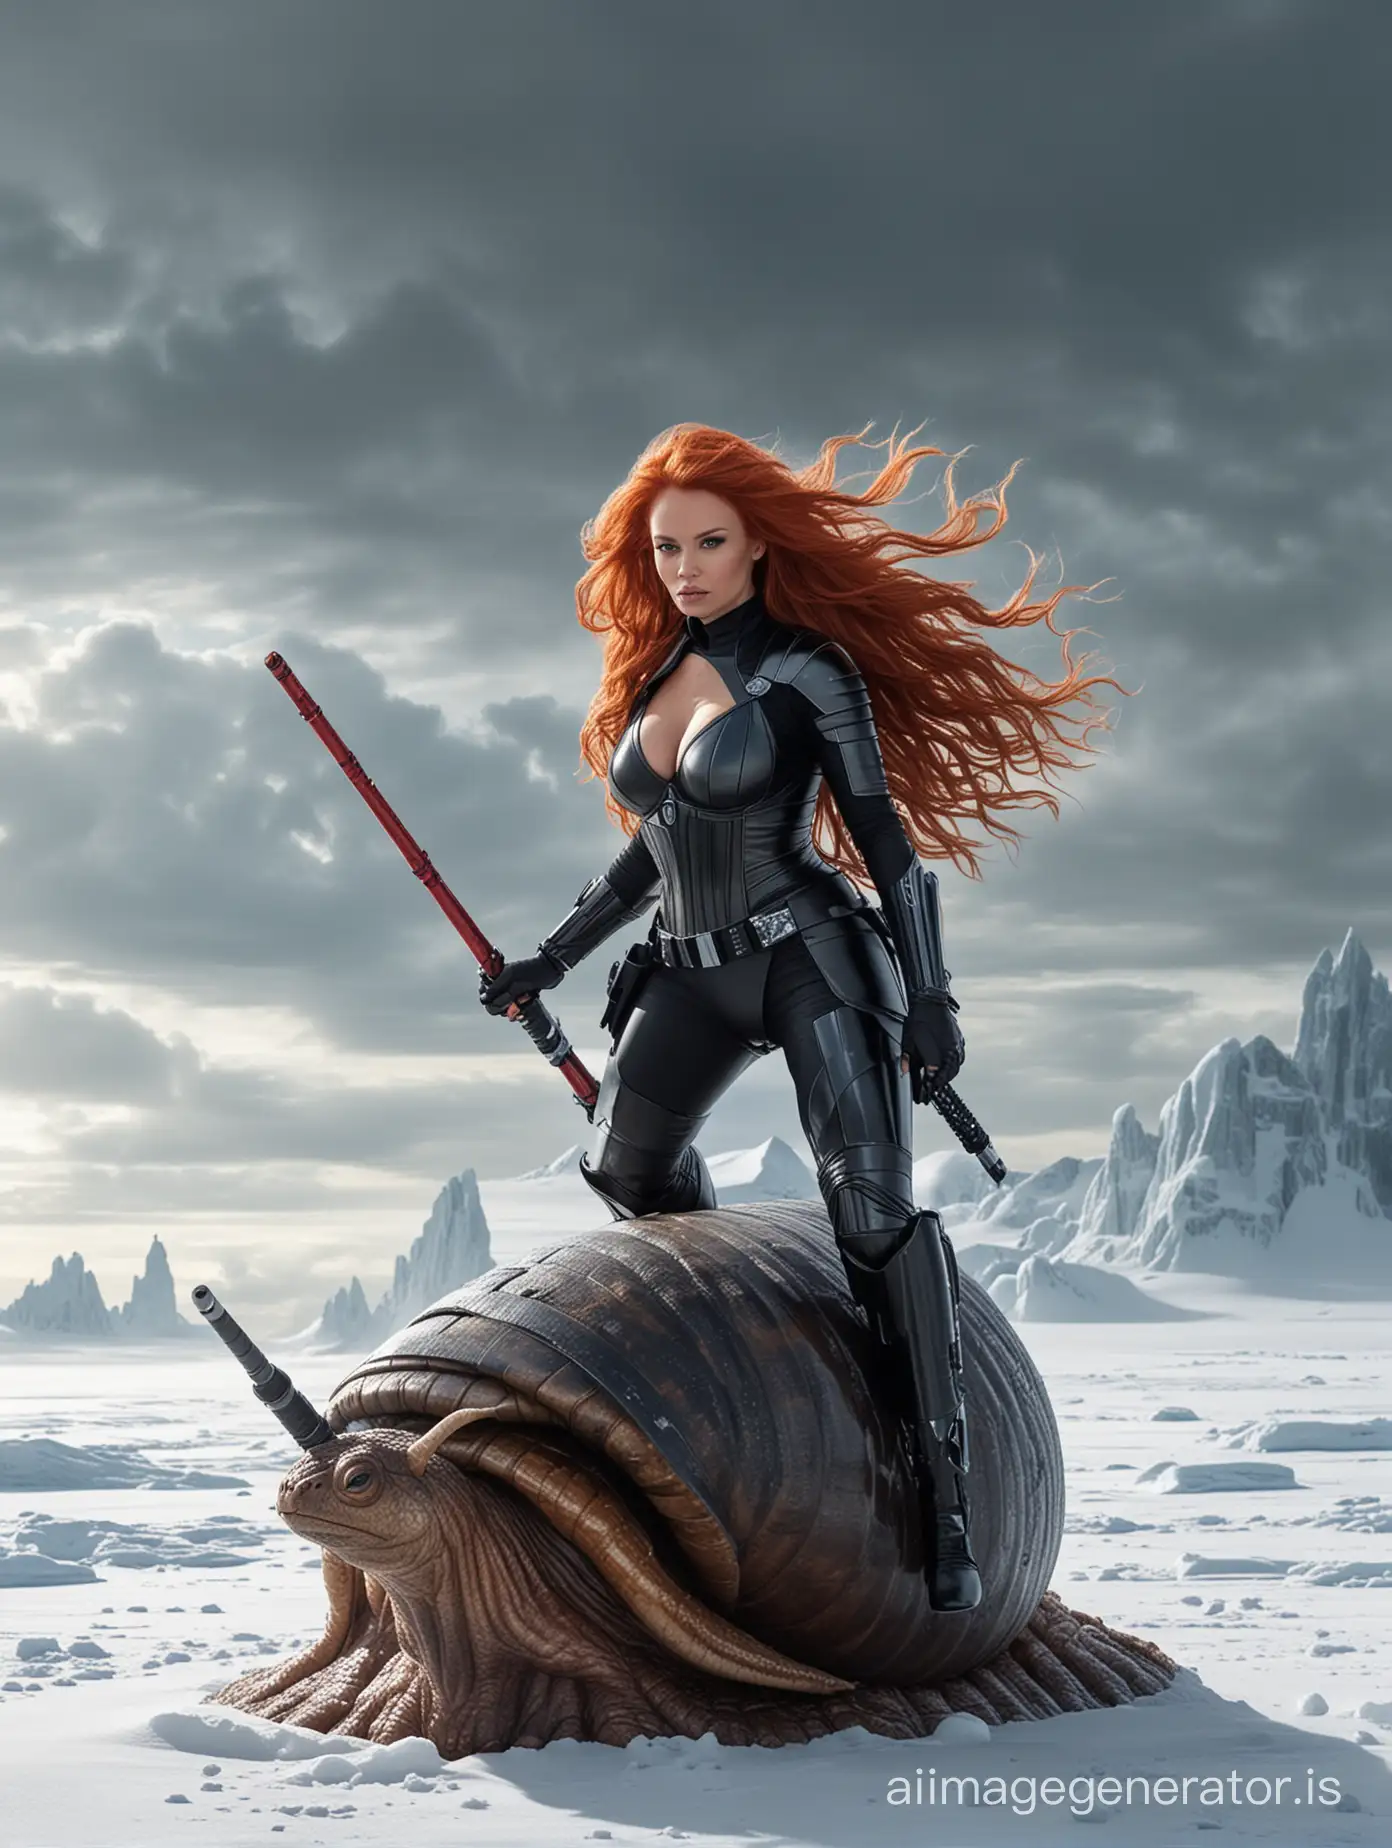 RedHaired-Pamela-Anderson-in-Darth-Vader-Armor-Rides-Giant-Snail-Amidst-Star-Wars-Battle